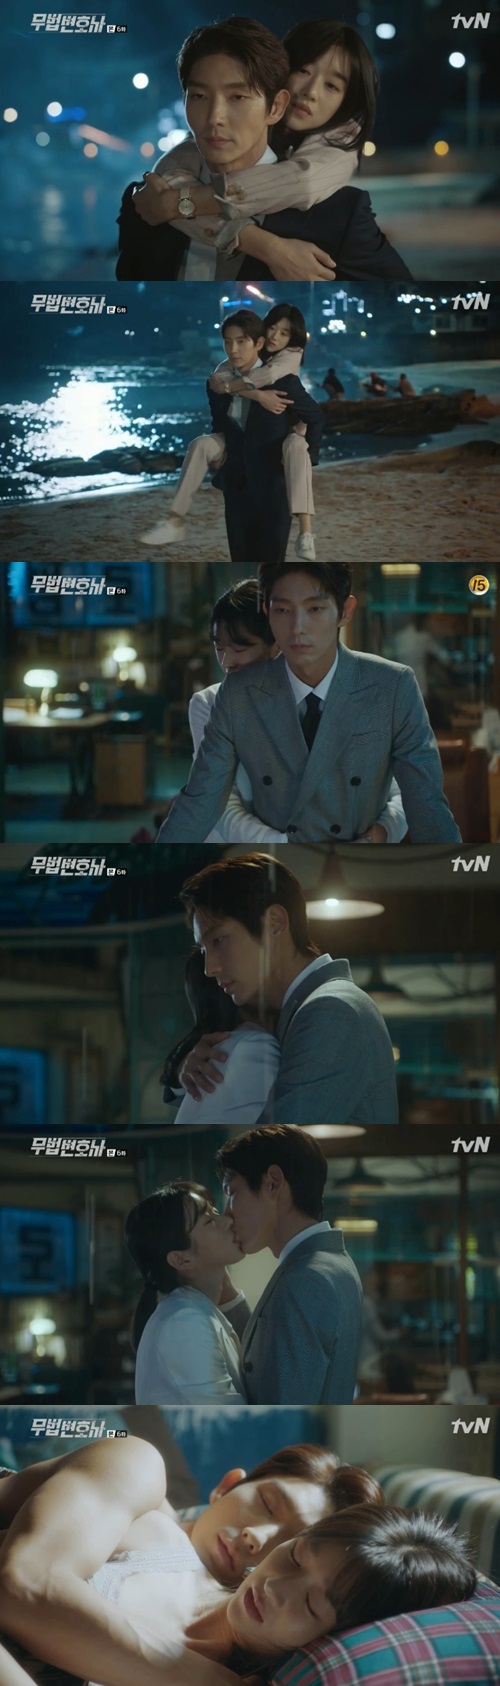 Viewers were baffled by Lee Joon-gi Seo Ye-jis high-speed romance.Bong Sang-pil (Lee Joon-gi) and Ha Jae-i (Seo Ye-ji) performed a high-speed romance on the 6th TVN weekend drama Lawless Lawyer broadcast on May 27 (playplayed by Yoon Hyun-ho/director Kim Jin-min).Bong Sang-pil returned to his hometown in 18 years to avenge Cha Moon-sook (Lee Hye-young), who killed his mother Choi Jin-ae (Shin Eun-jung), and first held hands with Ha Jae-yi, the daughter of Noh Hyun-joo, who helped him flee from his death crisis with his mother at the time.Lawyer Bong Sang-pil hired a lawyer, Ha Jae-yi, who was disciplined, as my secretary.Ha Jae-yi was thinking of Cha Moon-sook as a mother with his mother Roh Hyun-joos missing wounds, and Bong Sang-pil took charge of the case of Lee Dae-yeon, who wrote An Innocent Man, who killed Lee Young-soo, the established mayor by An Oh-ju, and made Ha Jae-yi take off the mask of An-ju Cha Moon-sook himself.Ha Jae-yi soon learned about Murder and MurderAn Innocent Man in An-o-ju, and found out that there was Cha Moon-suk behind it.Ha Jae-yi was surprised by the reversal of Cha Moon-sook, who had believed that he was surprised to find a picture of my mother, which Bong Sang-pil was hiding.This is where the man who asked Anoju to kill his mother is Cha Mun-suk, who told him what happened to me and what happened to your mother, and what happened to her, is Cha Mun-suk.Ha Jae-yi was in shock, and Bong Sang-pil drank and drank with Ha Jae-yi.Ha Jae-yi then asked Woo Hyung-man, who kidnapped Bong Sang-pil and Roh Hyun-joo 18 years ago, as instructed by An-oh, to reveal that he was the daughter of Roh Hyun-joo and asked his mothers whereabouts.Ha Jae-yi was desperate to know that the word meant the death of his mother.Ha Jae-yi came to Bong Sang-pil and asked him, How did you live 18 years like this? Bong Sang-pil kissed him in addition to hugging Ha Jae-yi, who shared the same wound.And Bong Sang-pil Ha Jae-yi was pictured waking up together after spending the night together.It was somewhat sudden that Ha Jae-yi, who had just confirmed the past wounds and the revenge target, An-ju Cha Moon-sook, was playing a high-speed romance with Bong Sang-pil.After the broadcast, viewers said through the related bulletin board, How do you do it in that situation suddenly? I think I have lost my progress too soon. I understood it. Kiss?I wanted to have no love line, but this is a full adult love, Mid is changing lovers from time to time, but this is what, and complained.Yoo Gyeong-sang